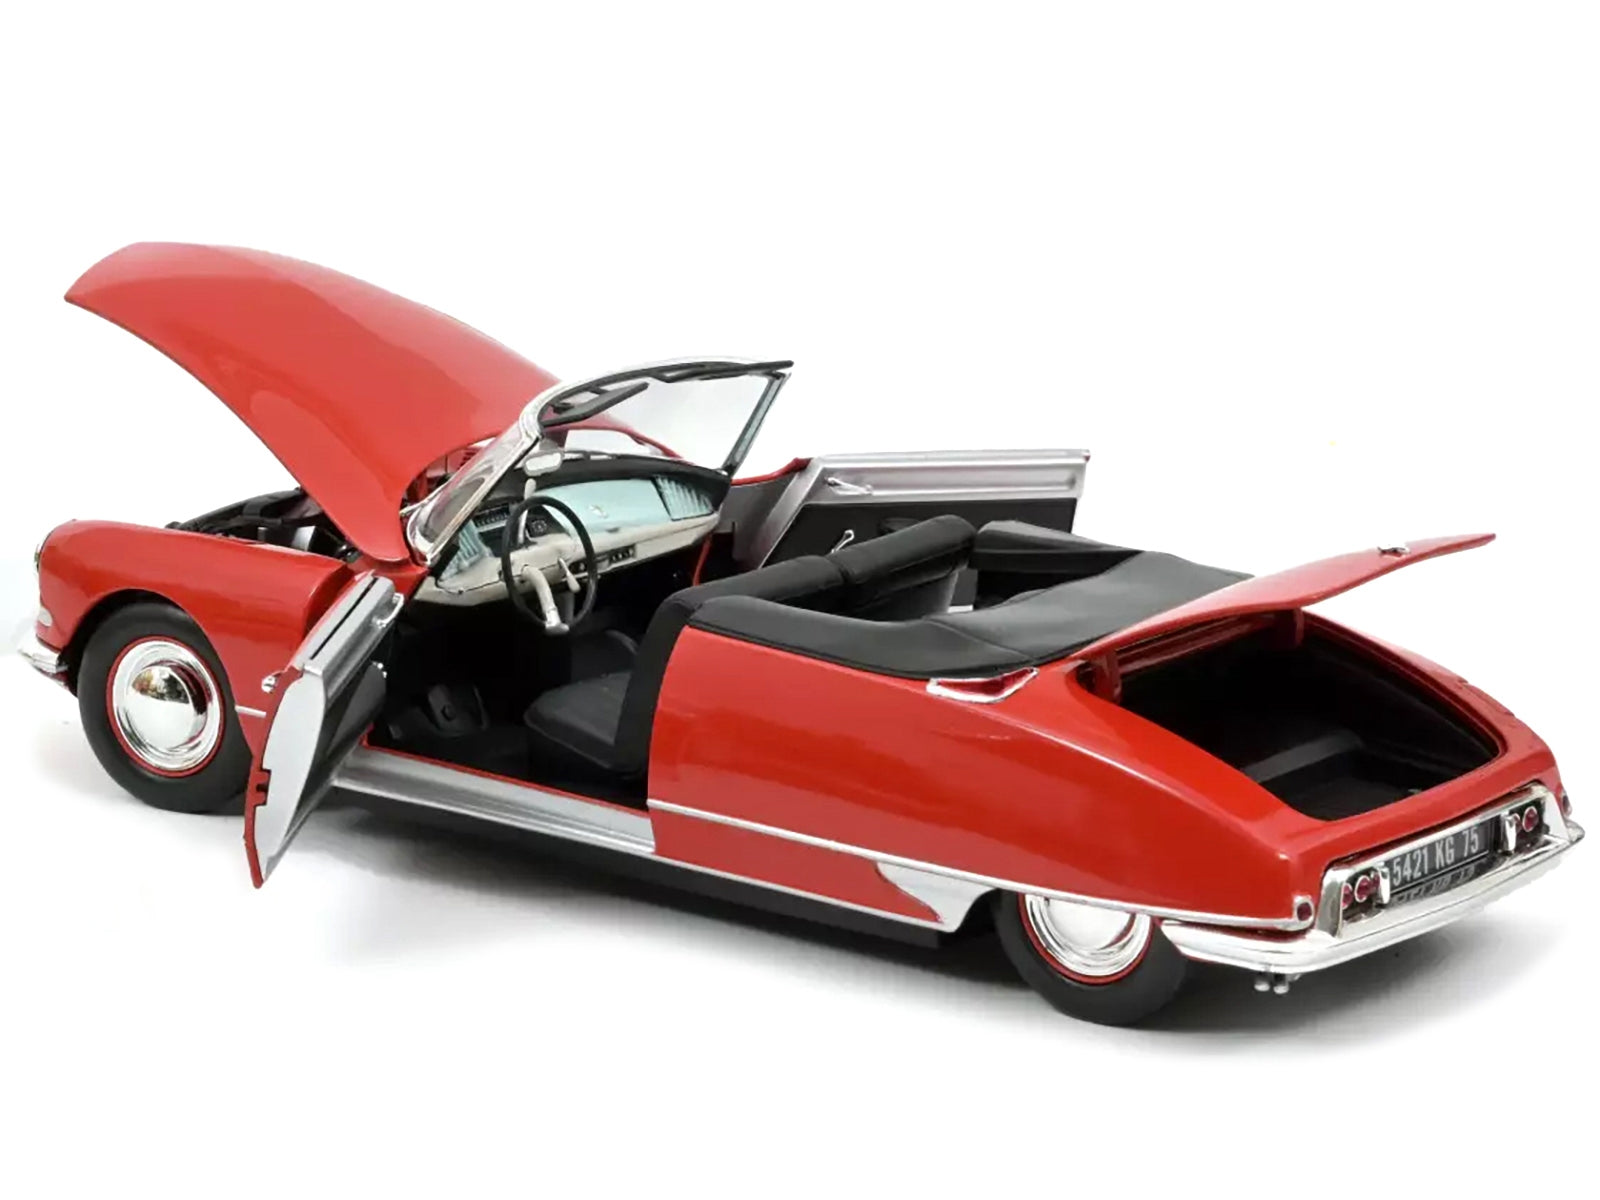 1961 Citroen DS 19 Cabriolet Corail Red 1/18 Diecast Model Car by Norev